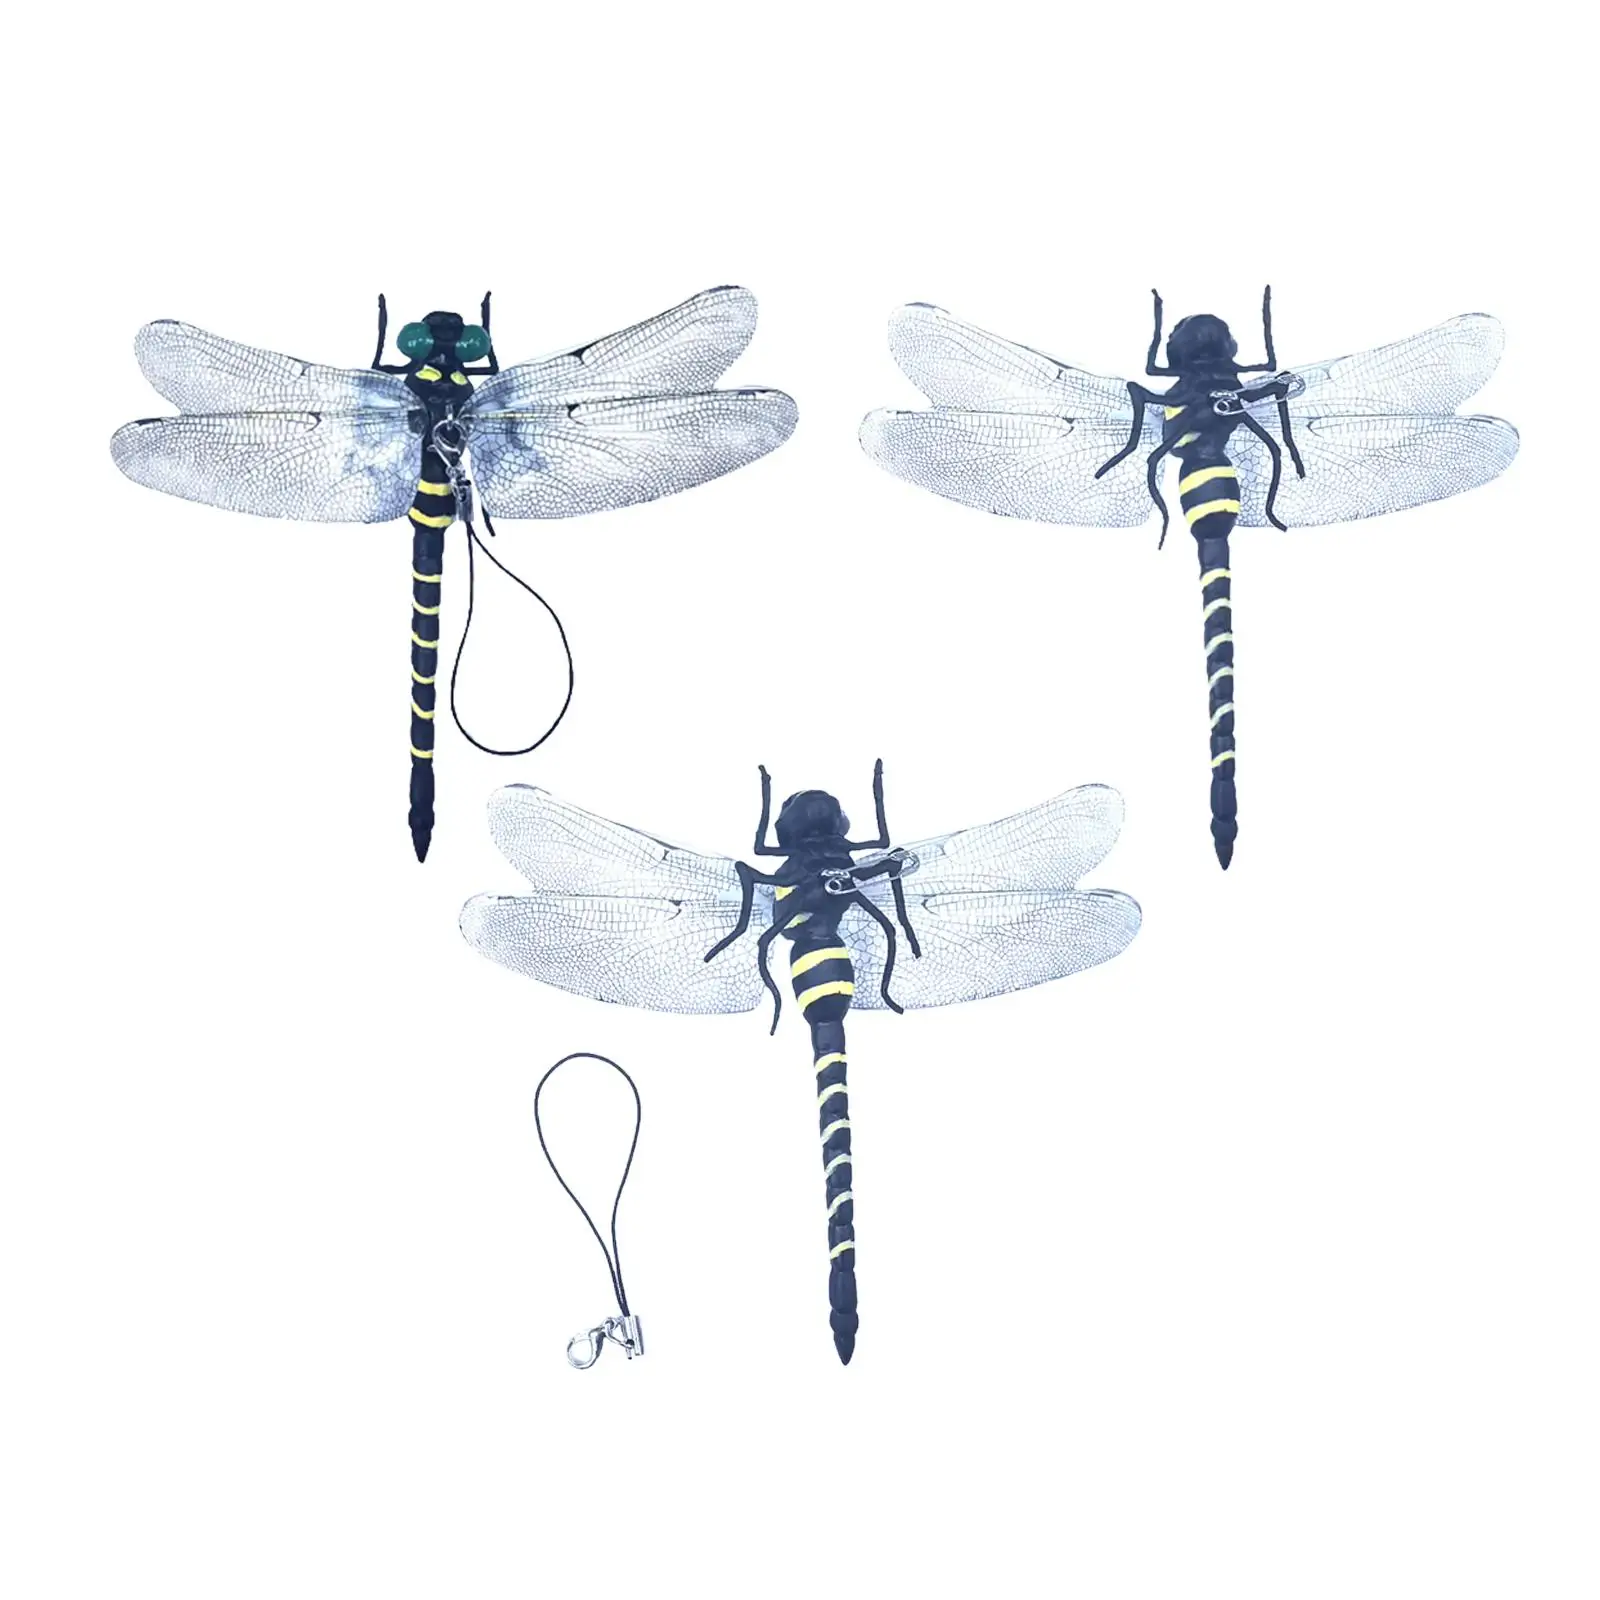 Dragonfly Figure Flies Crafts Realistic Dragonfly Figure for Trees